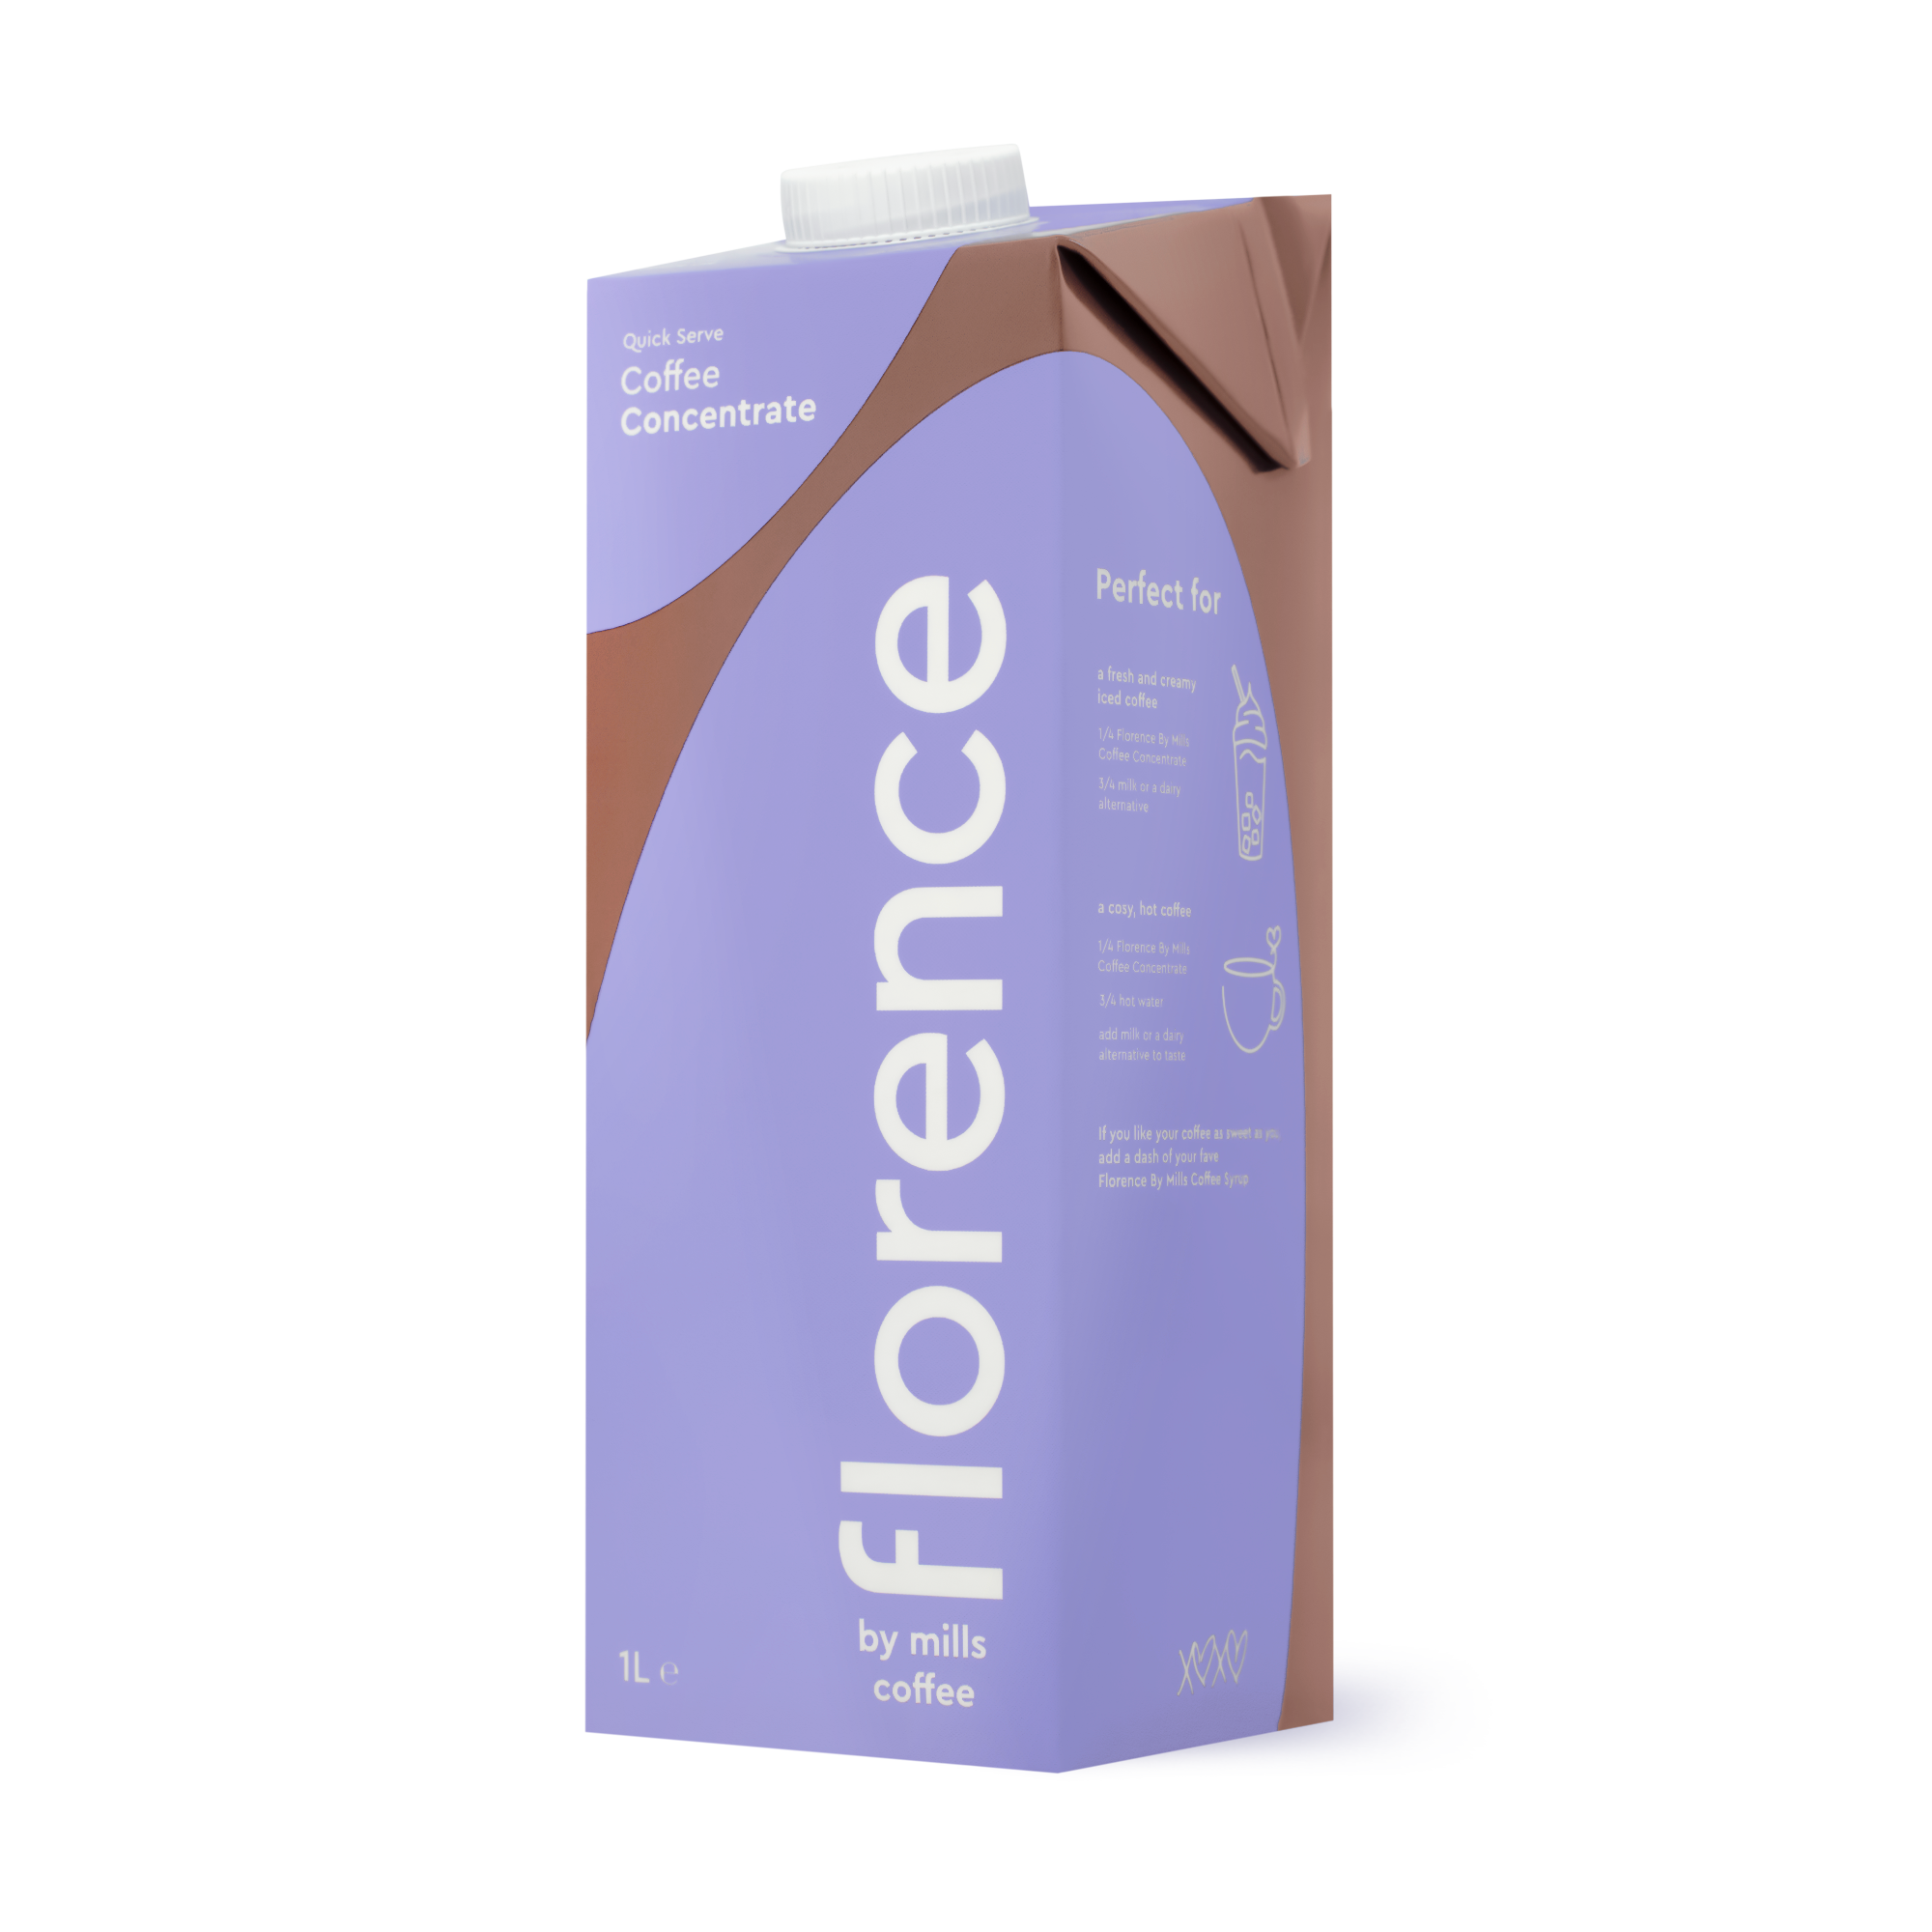 florence by mills coffee | Coffee Concentrate | UK/EU